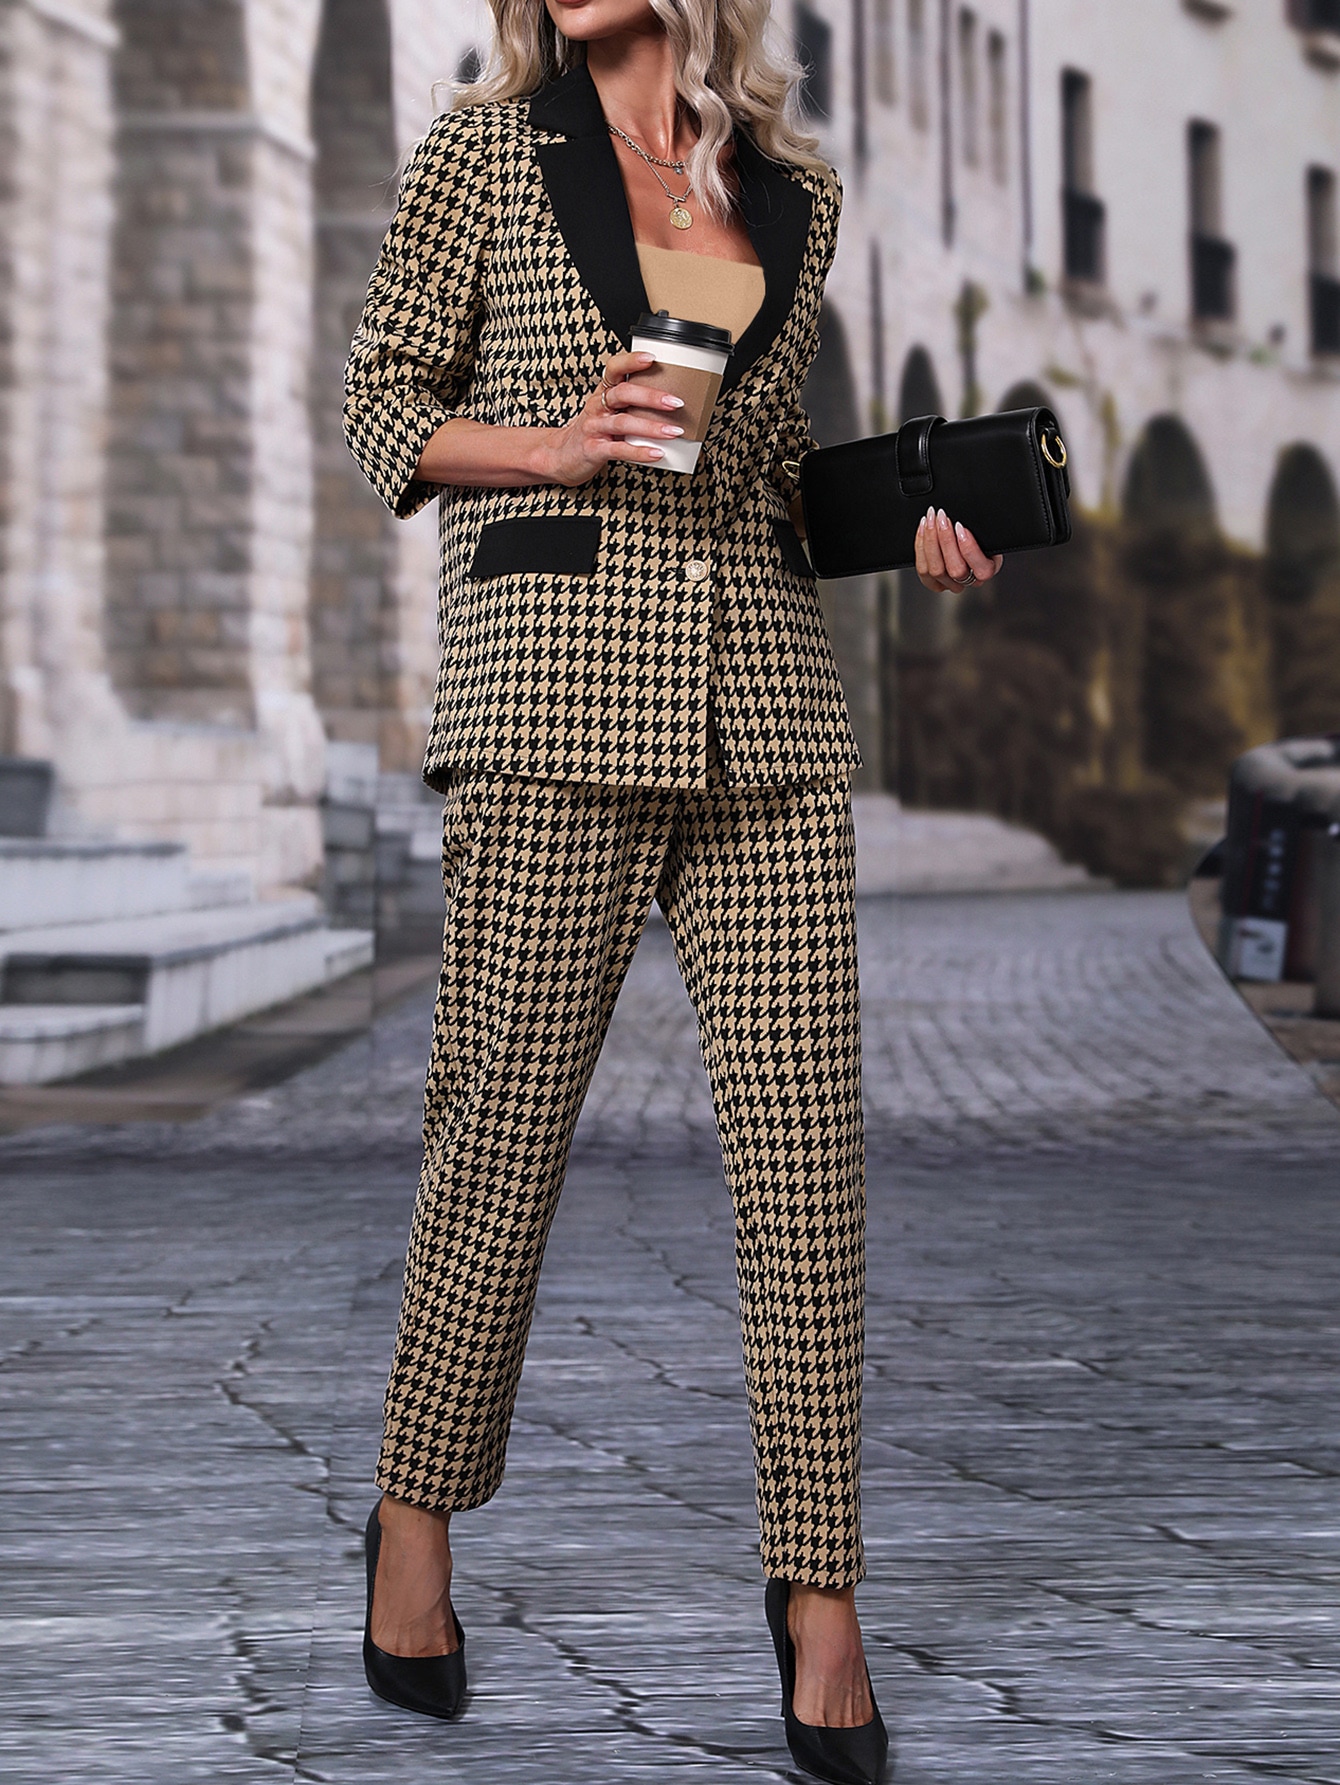 Elegant Plaid Women Pants Suits Slim Fit Celebrity Outfits Evening Party Mother of the Bride Wedding Formal 